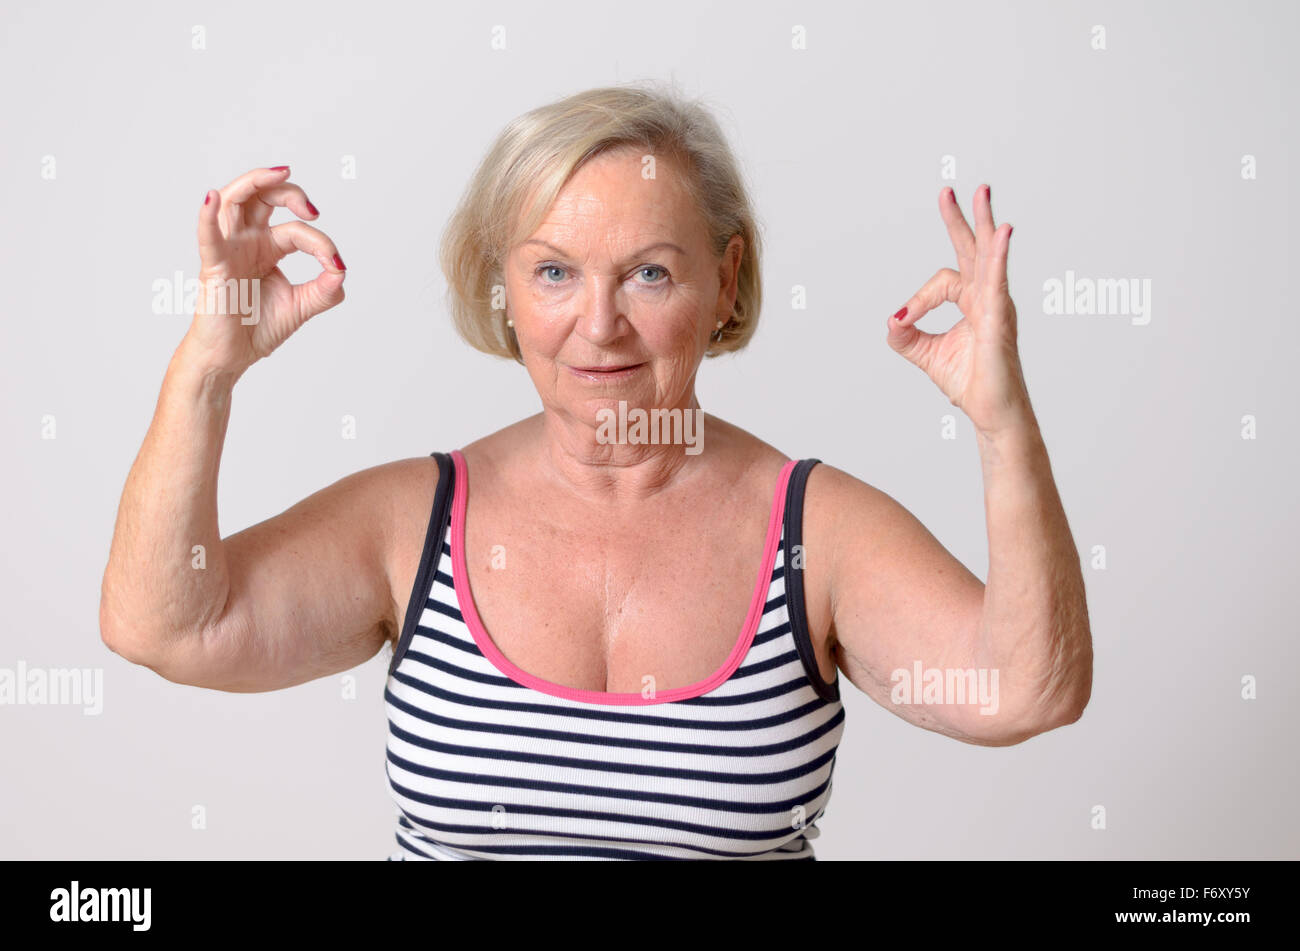 Portrait of a Middle Aged Blond Woman in Casual Striped Shirt, Showing Two Okay Hand Signs While Looking at the Camera. Isolated Stock Photo